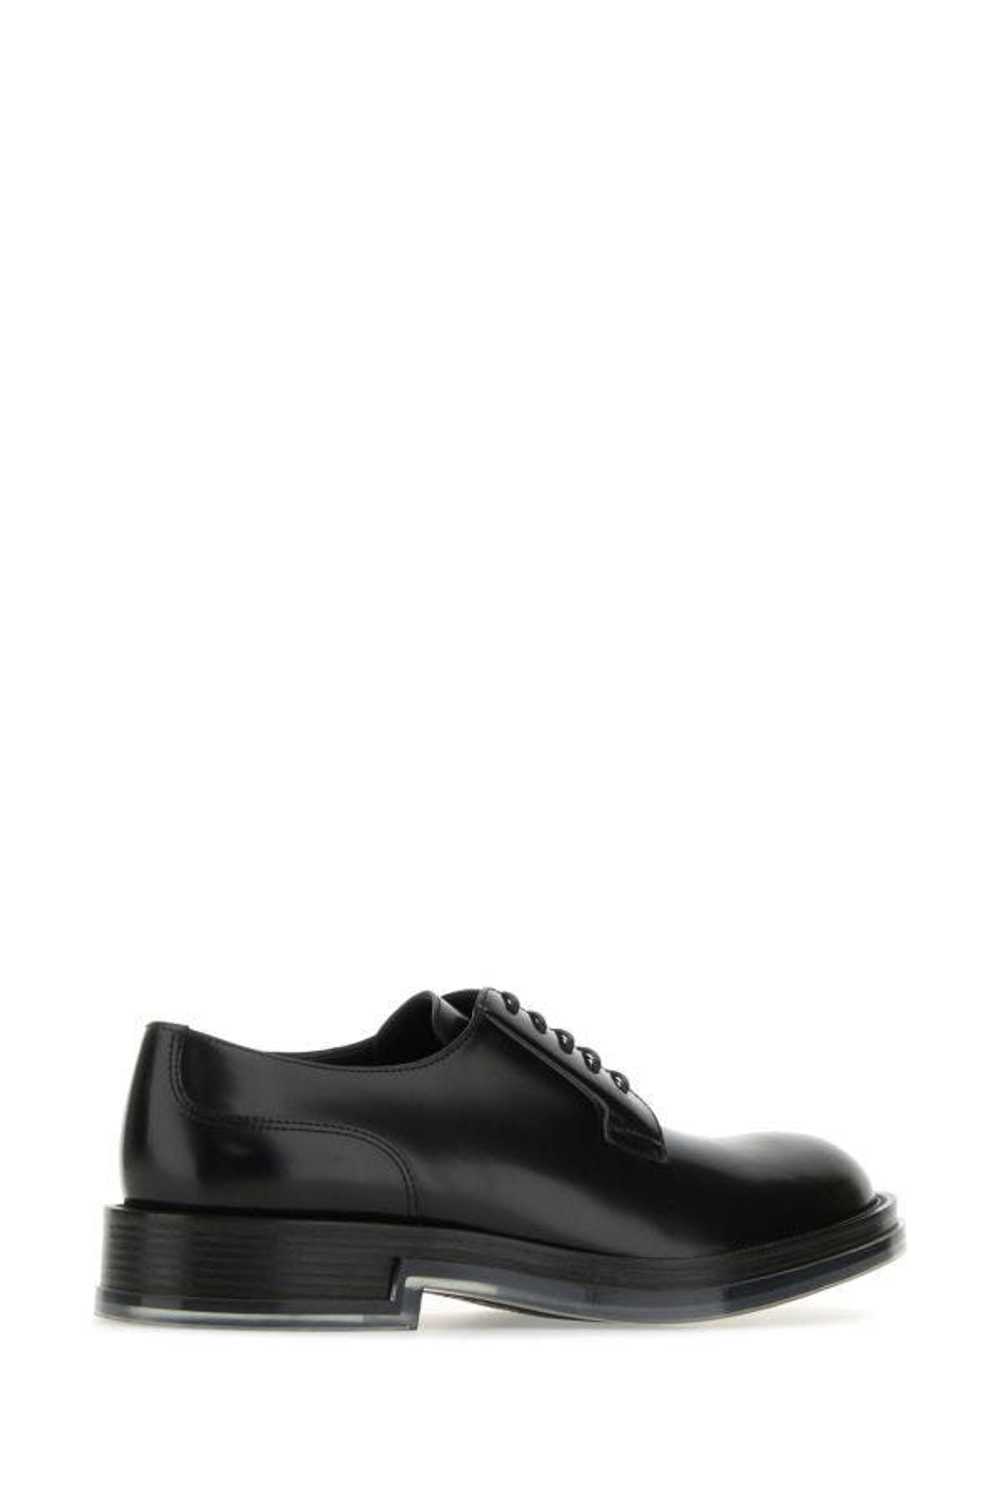 Alexander McQueen Black Leather Float Lace-Up Sho… - image 5